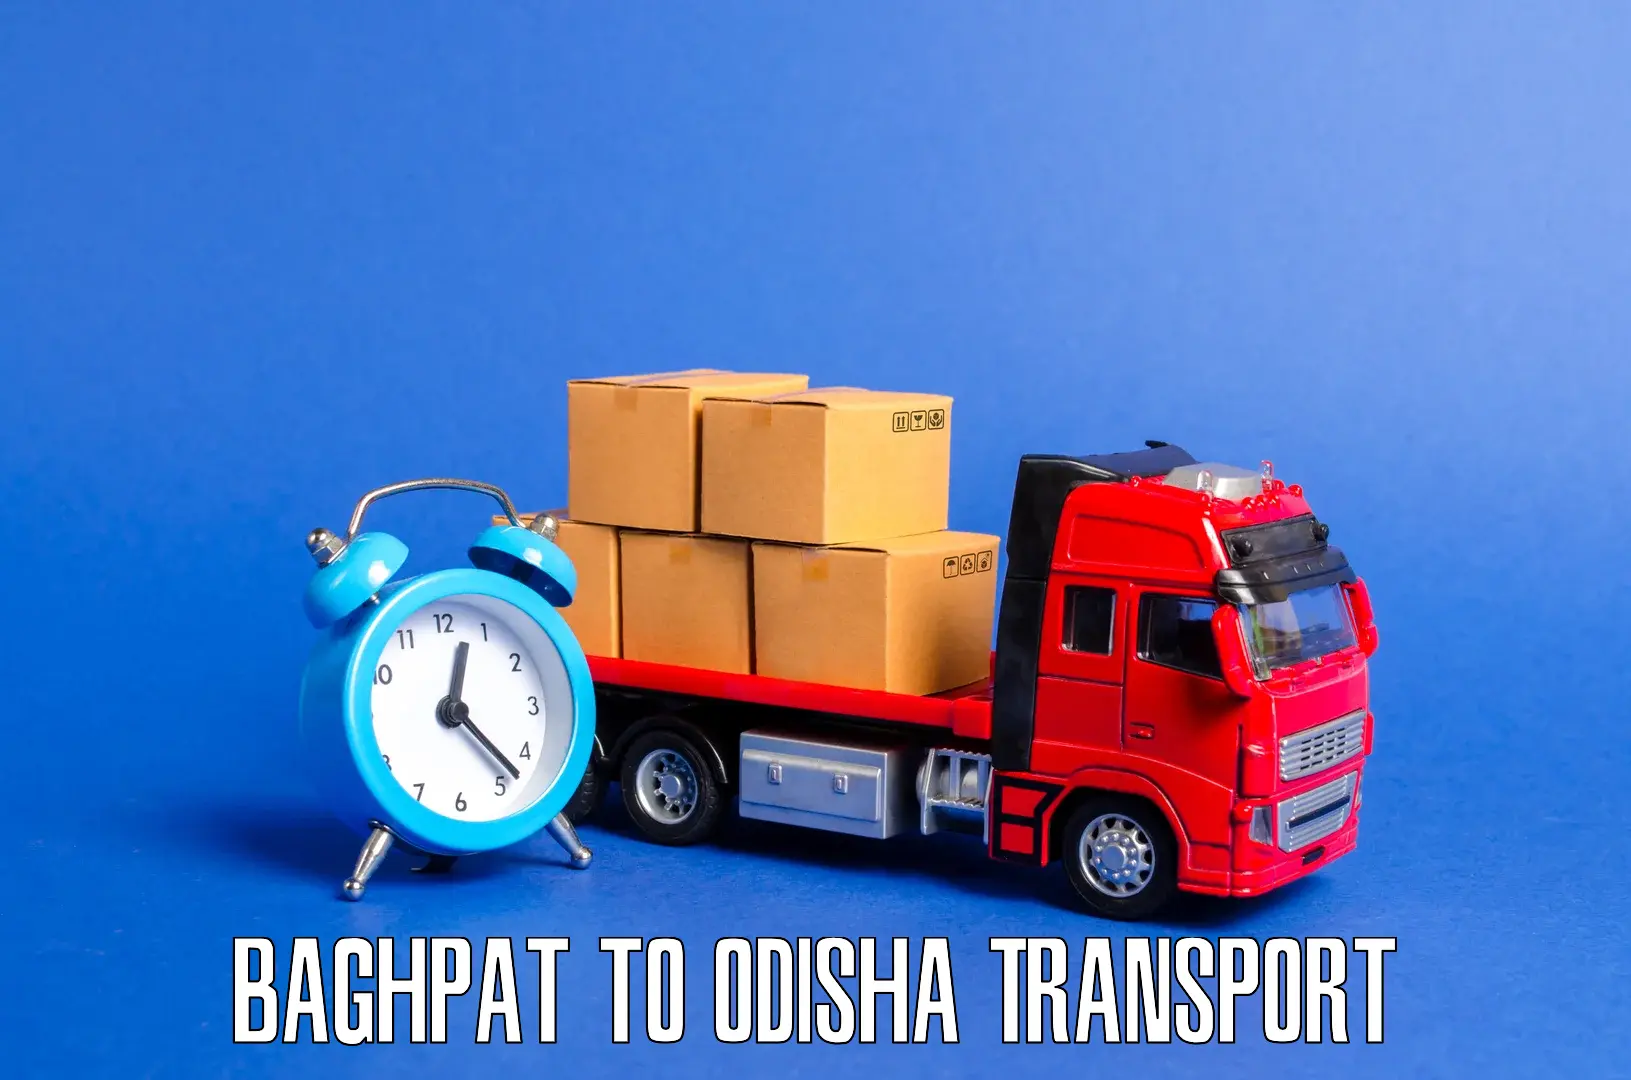 Daily parcel service transport Baghpat to Boipariguda